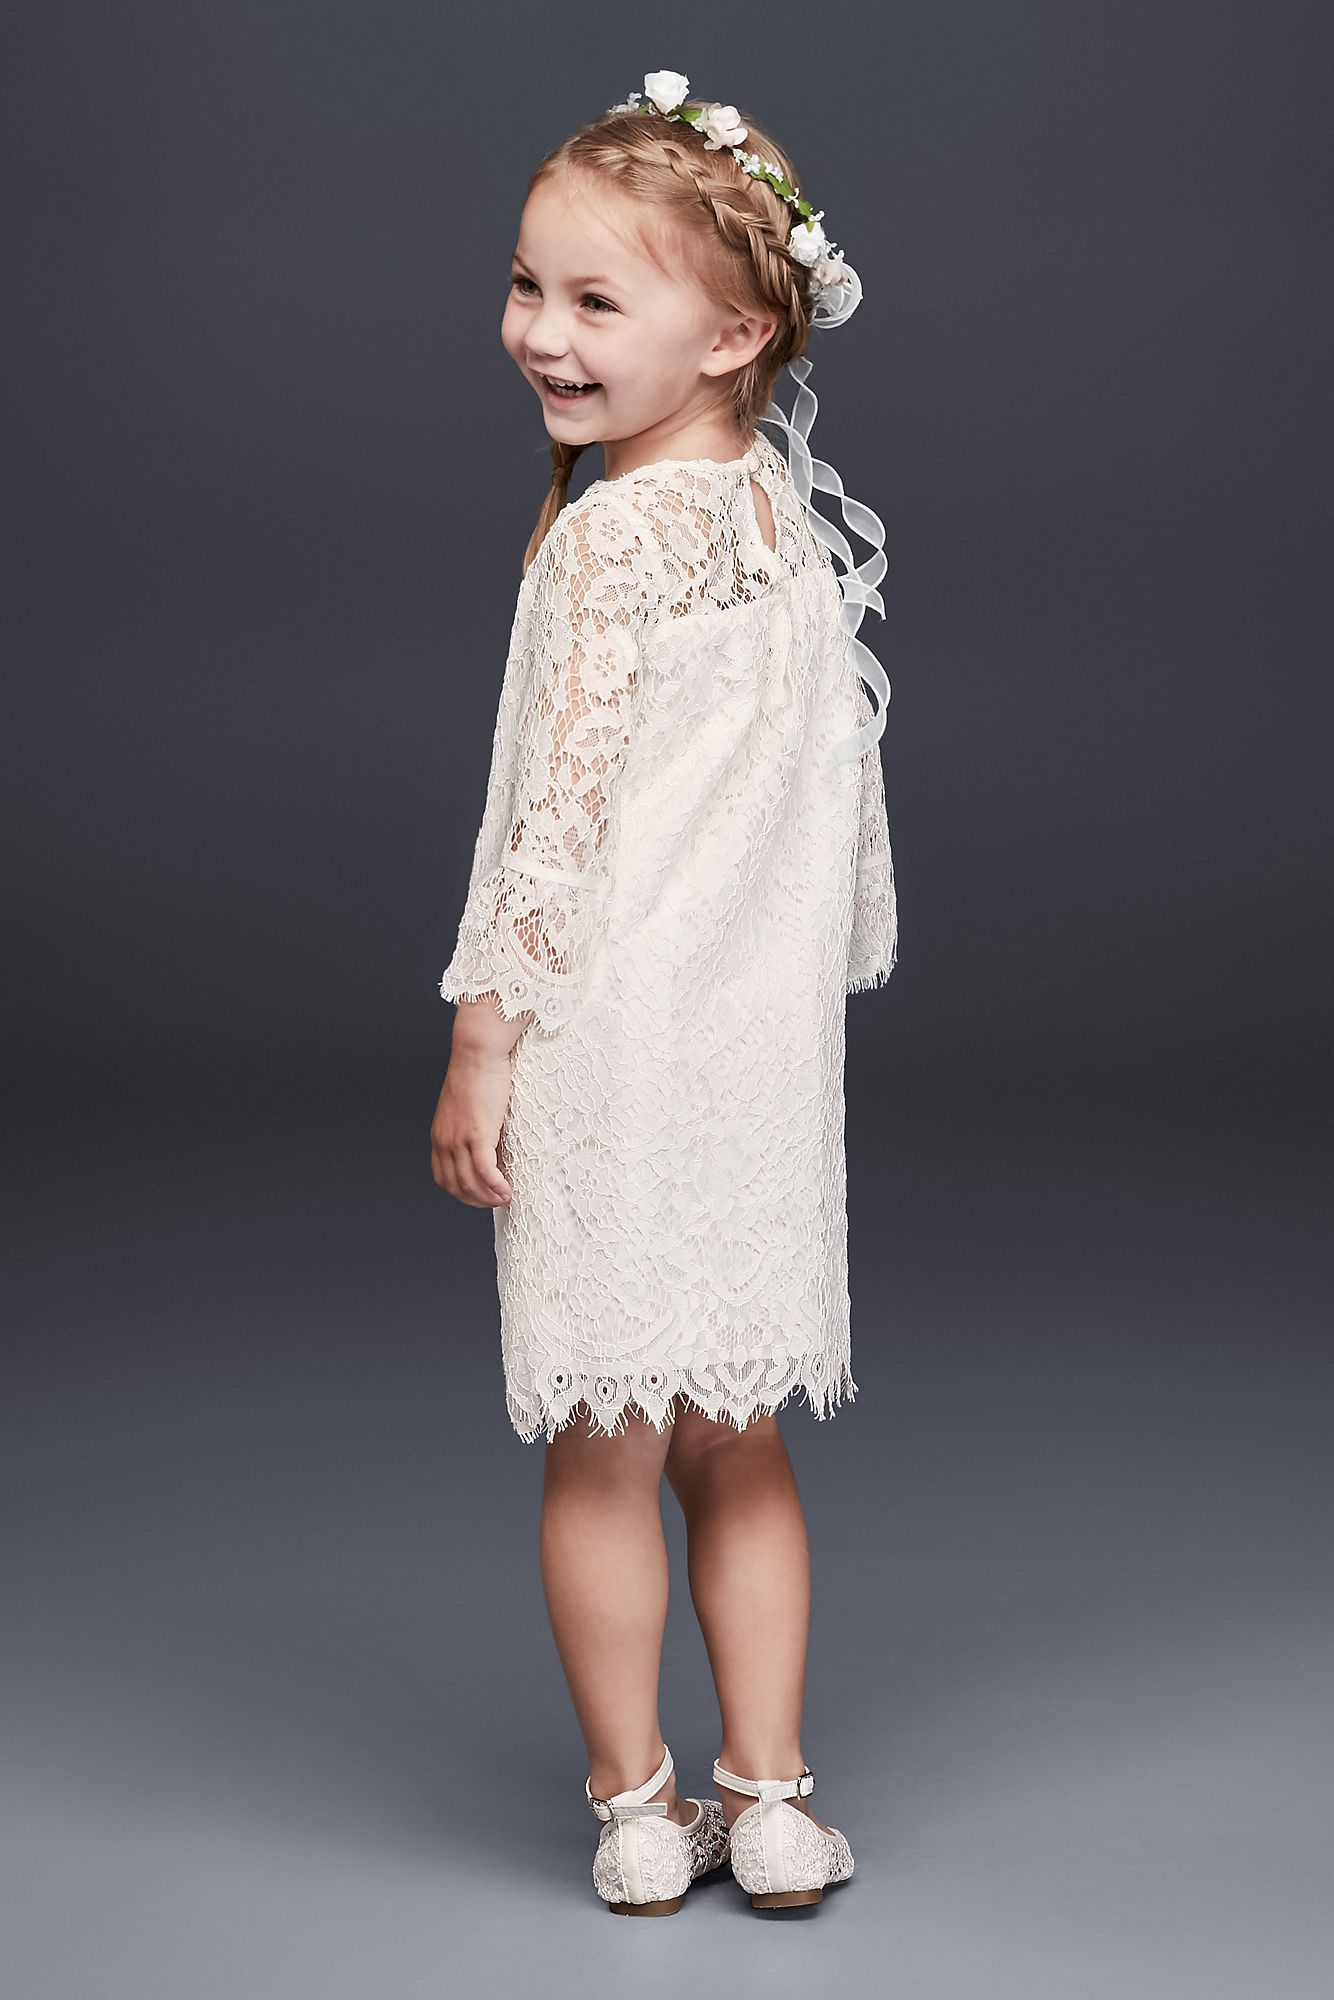 Short Lace Flower Girl Dress with Illusion Sleeves   OP239